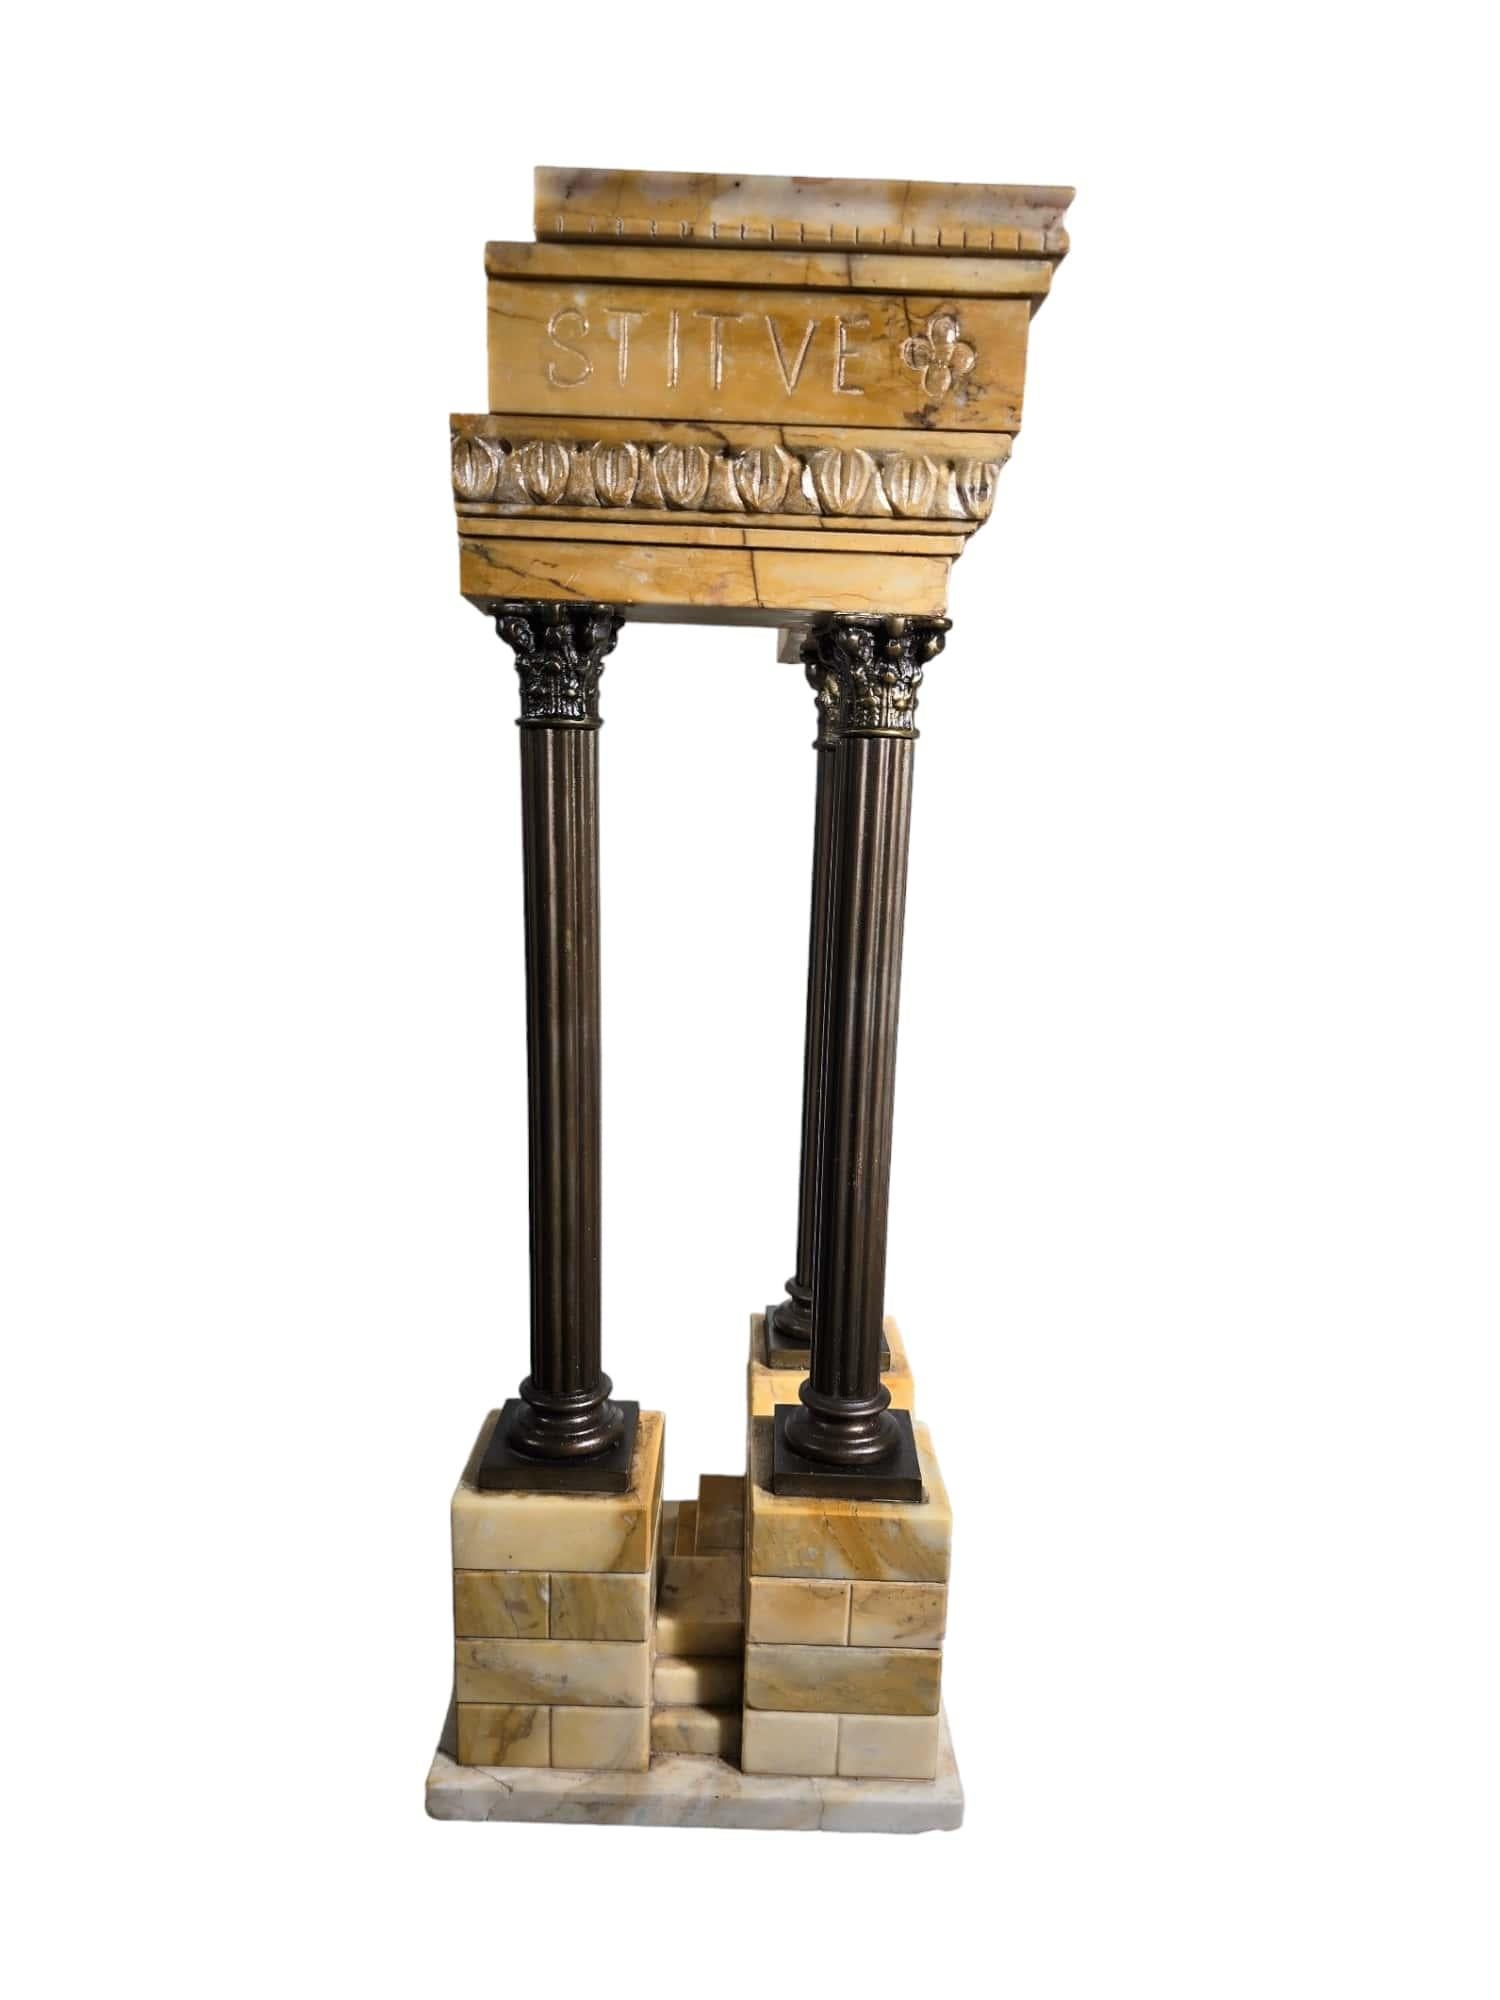 This exquisite model of the Temple of Vespasian crafted in Giallo Antico Marble and Bronze exemplifies the exceptional craftsmanship and artistic mastery of the Grand Tour era. Created in an Italian workshop circa 1920, this piece is a testament to